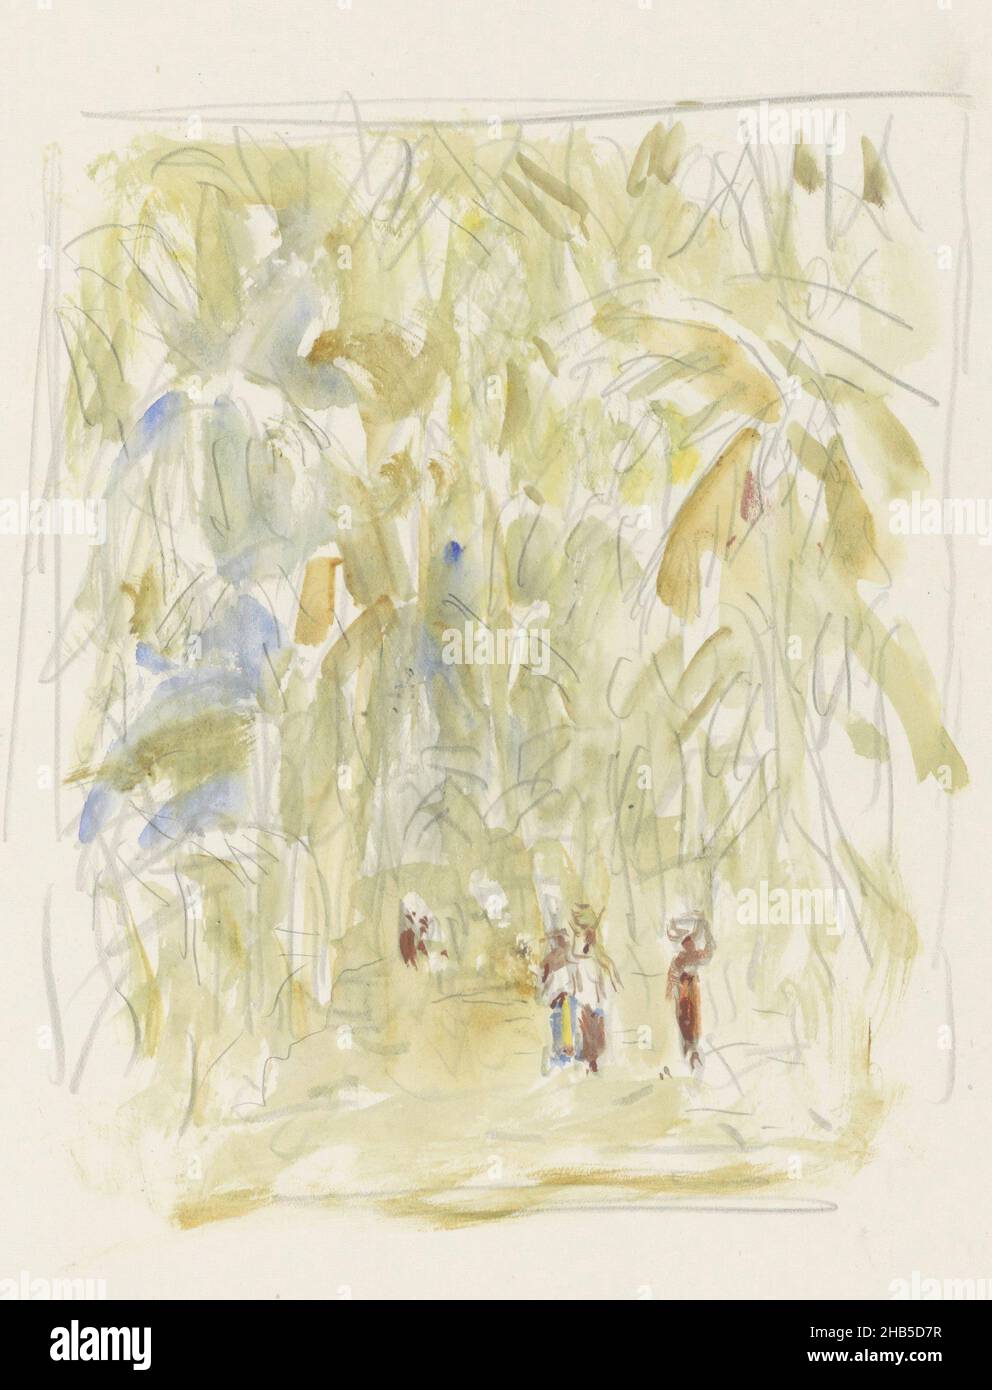 Some of the figures carry bowls on their heads. Page 10 from a sketchbook with 48 pages, Figures in the forest of Siam., draughtsman: Marius Bauer, Thailand, 1931, brush, Marius Bauer, 1931 Stock Photo